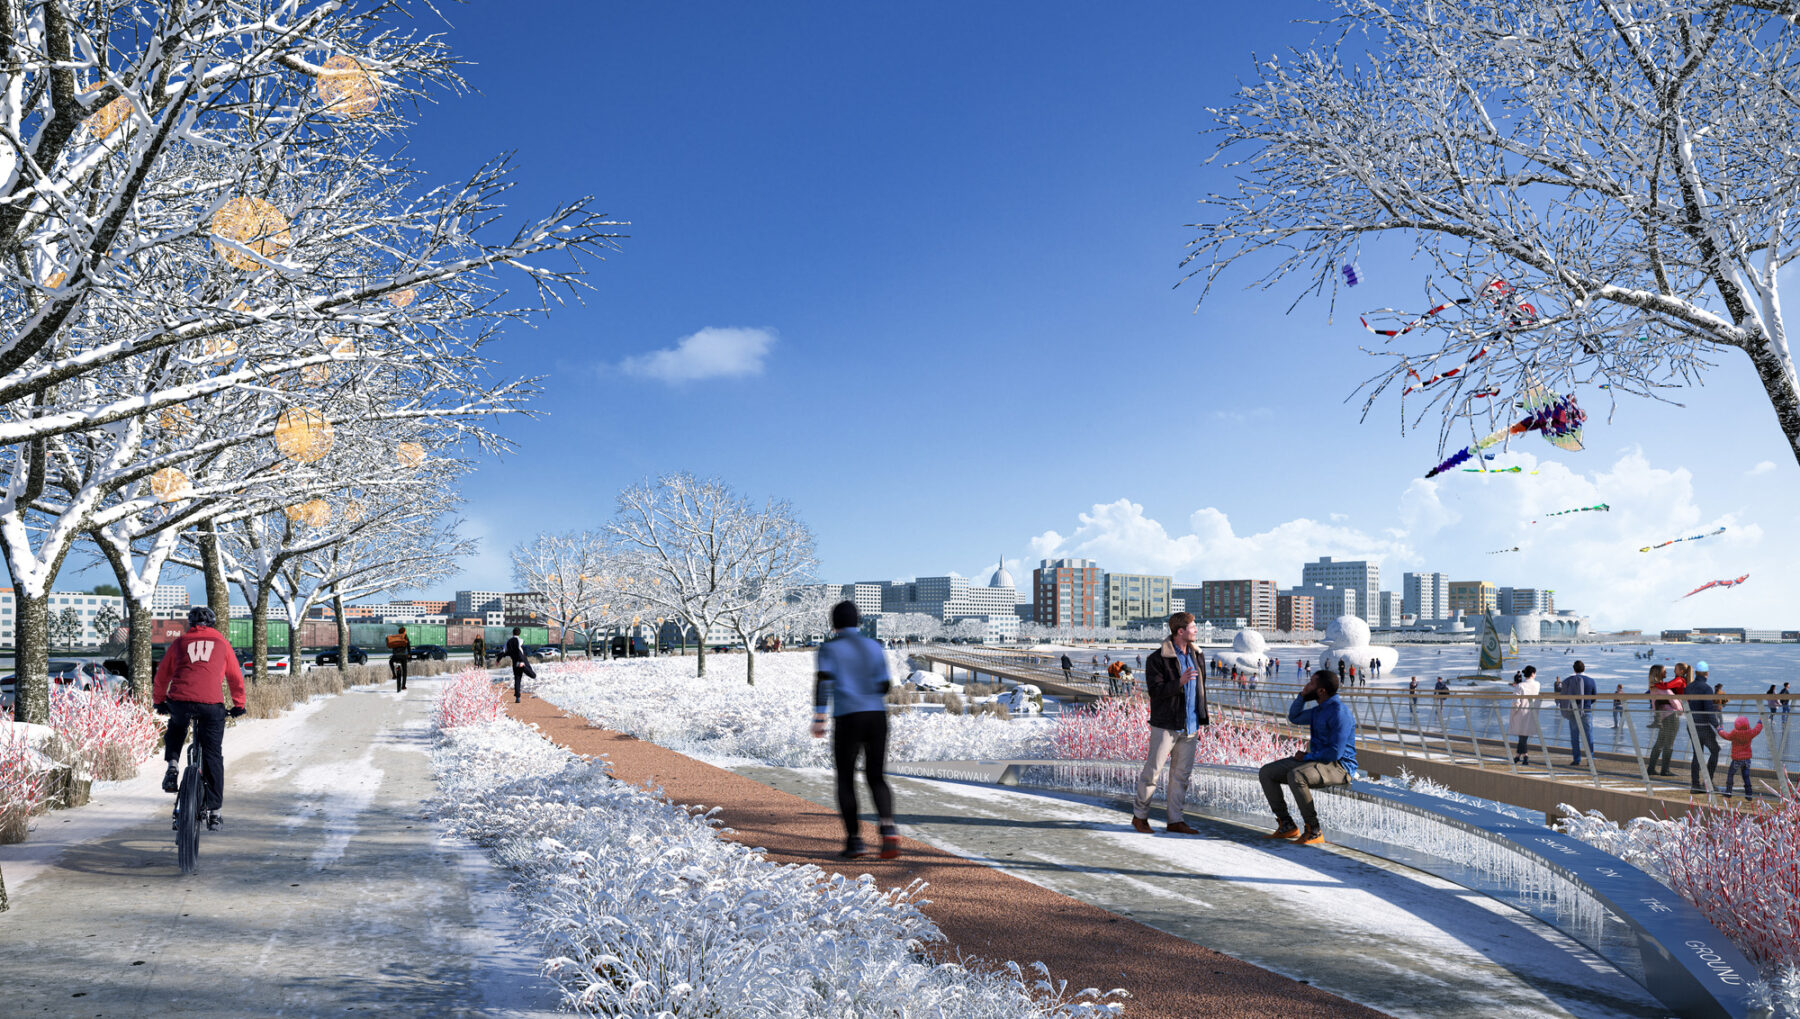 rendering of pedestrians walking on snowy paths along Lake Monona waterfront during winter months with city skyline in background